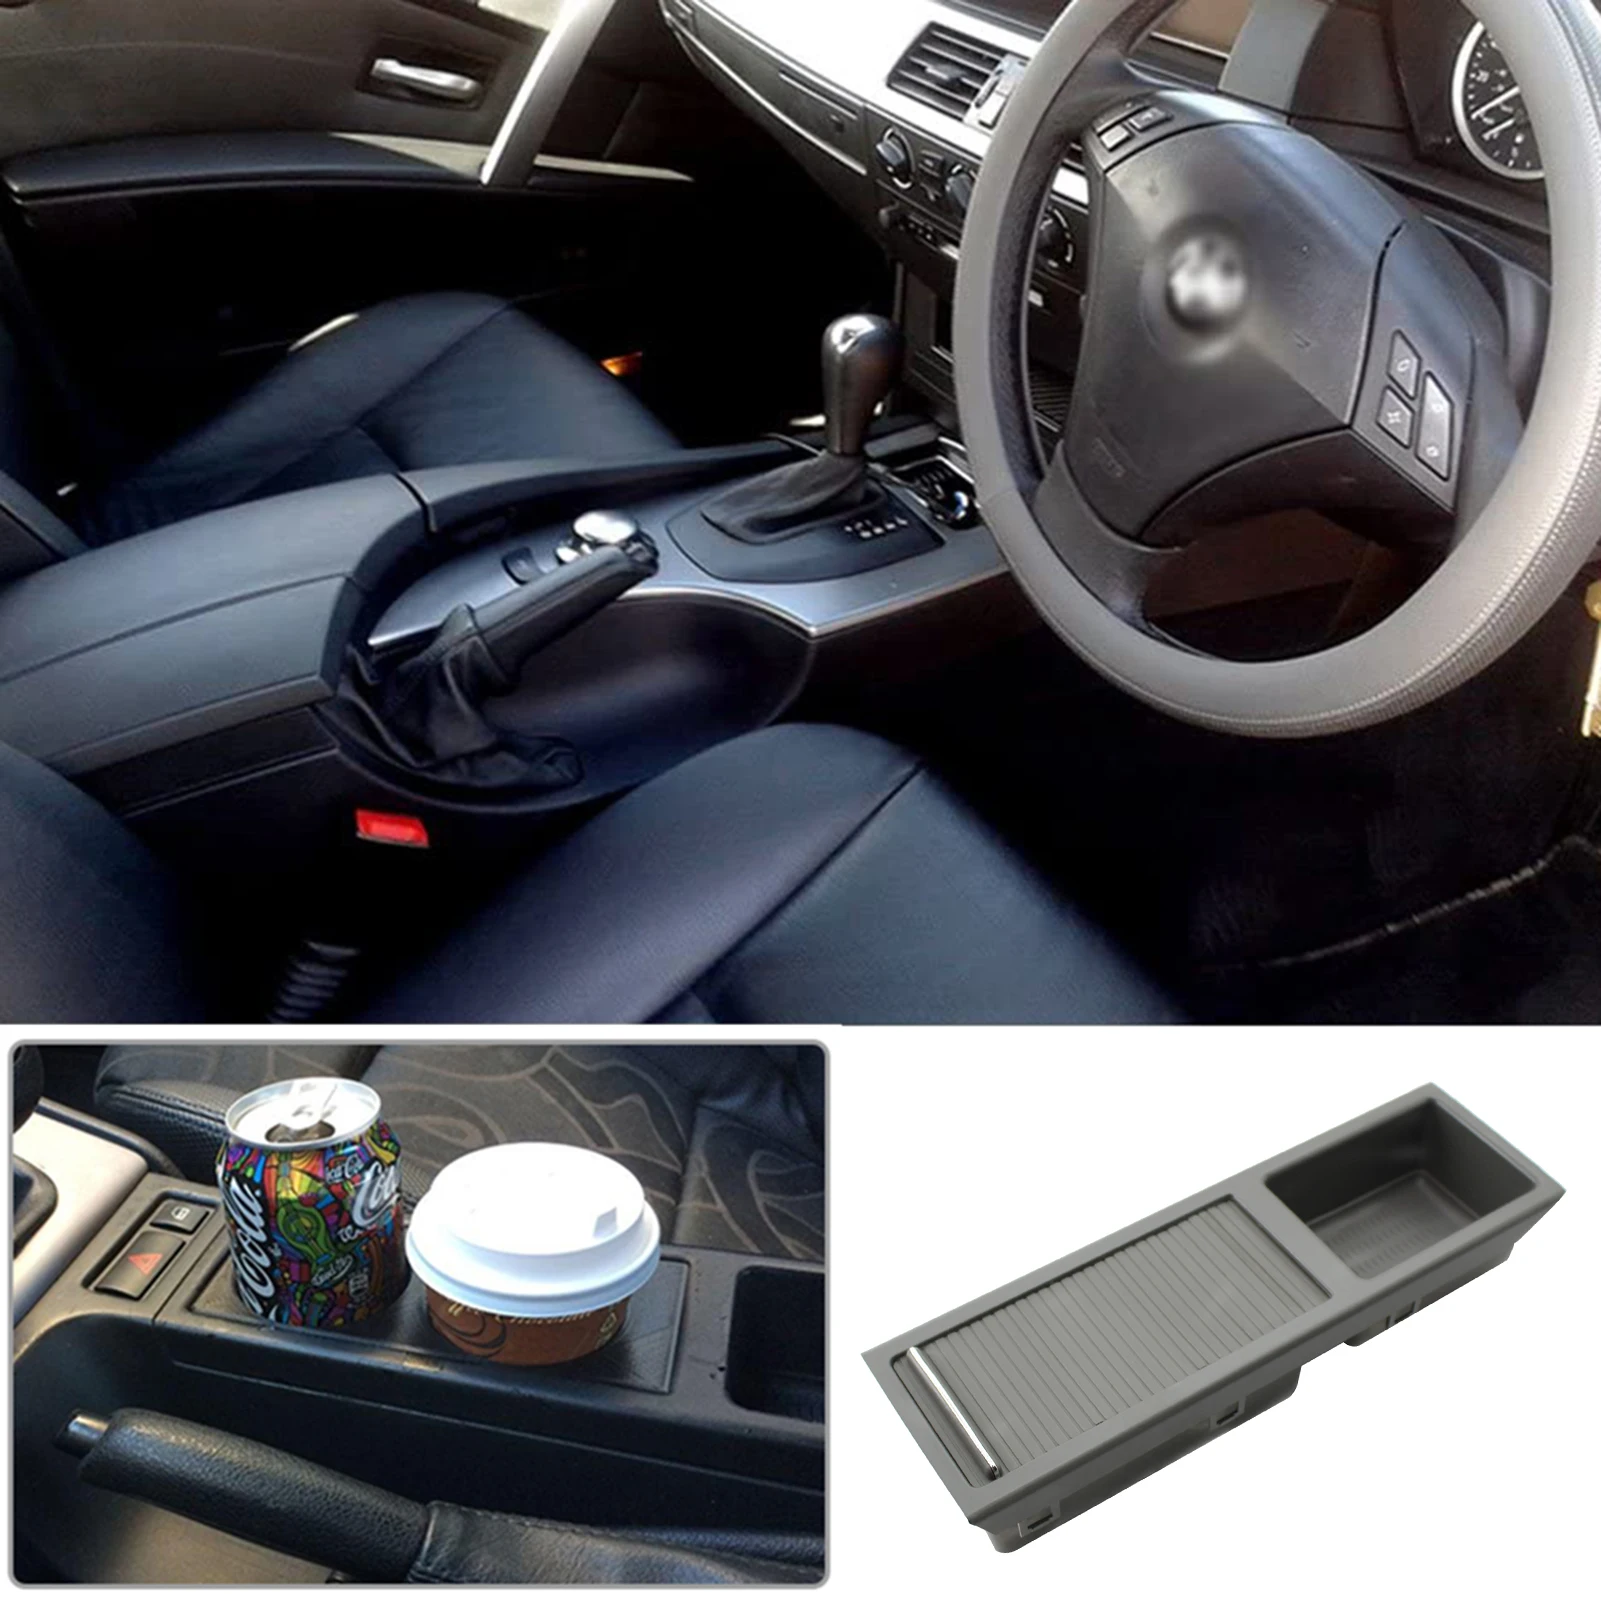 

Car Front Center Console Drink Cup Holder Coin Holder Interior Storage Tray Replacement for BMW 3 Series E46 1999-2005